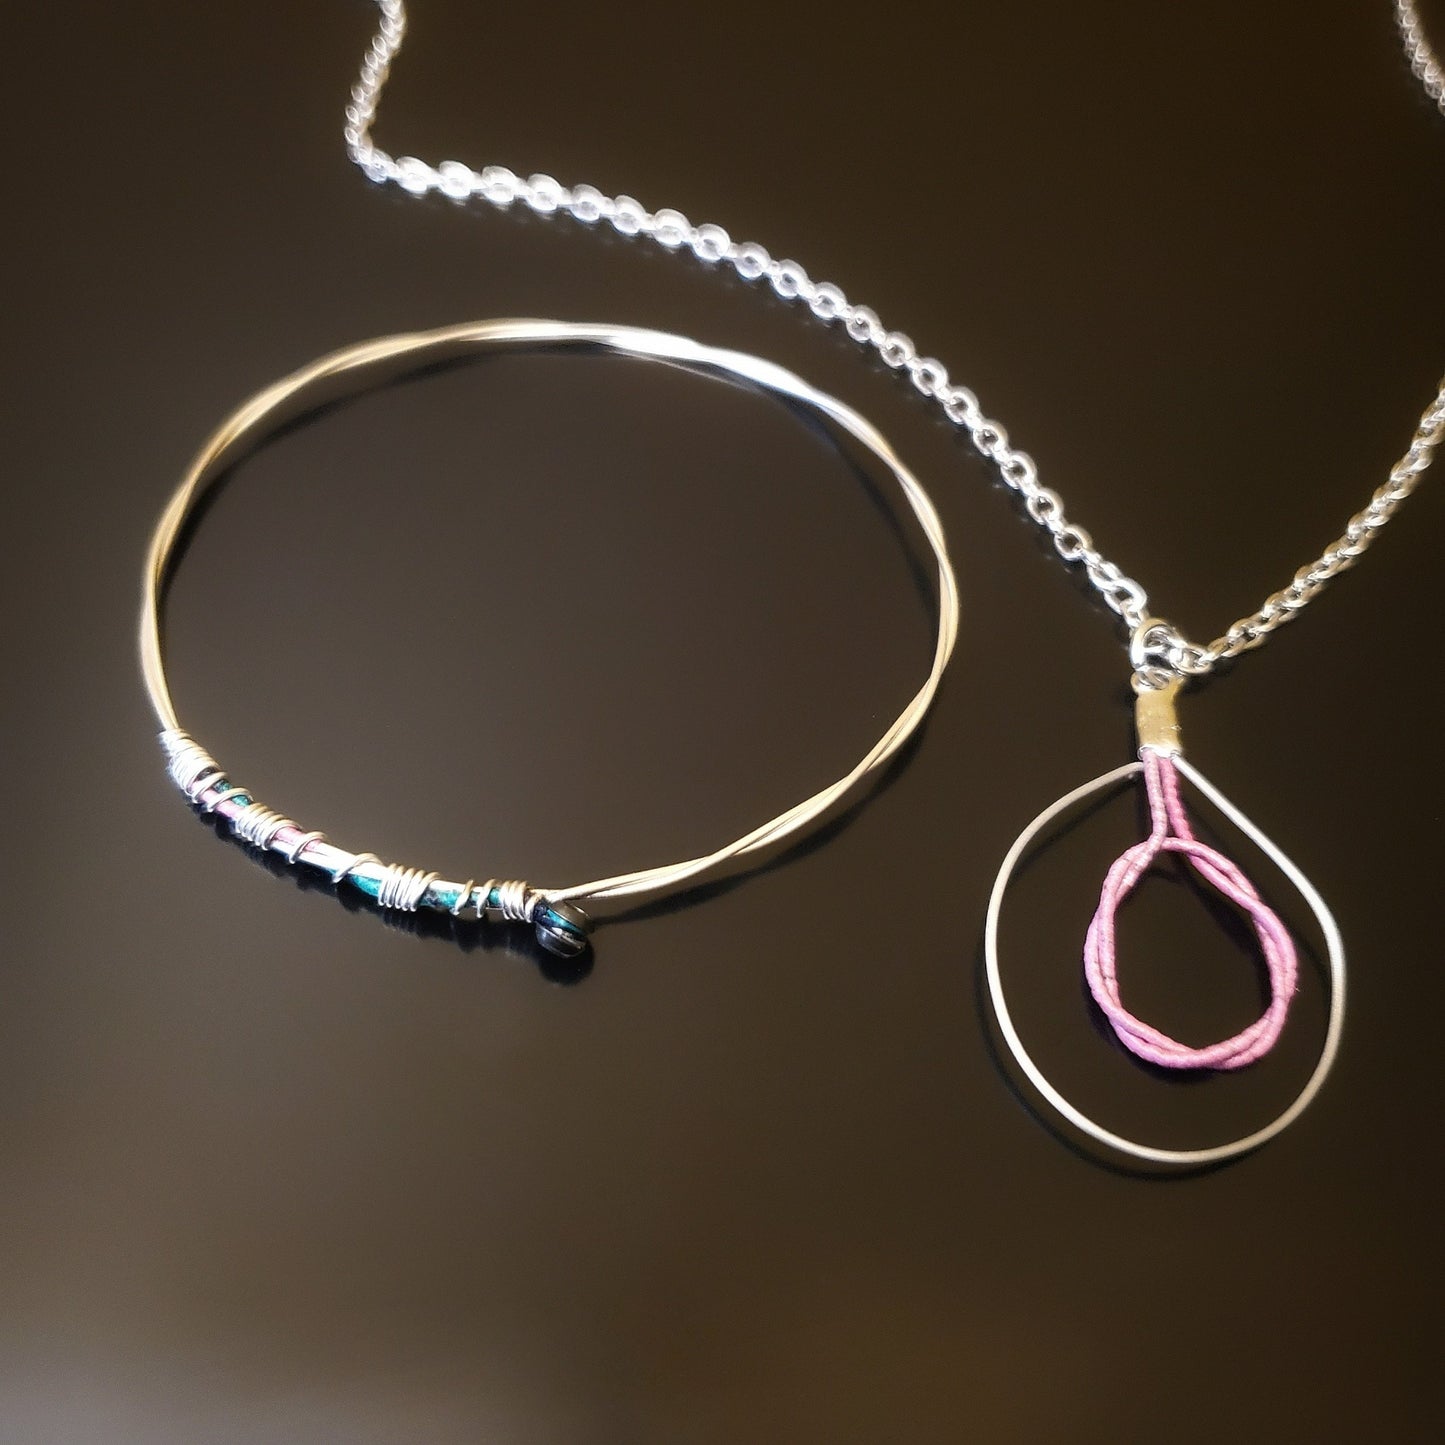 bangle style bracelet and necklace with pink and silver colours on black background